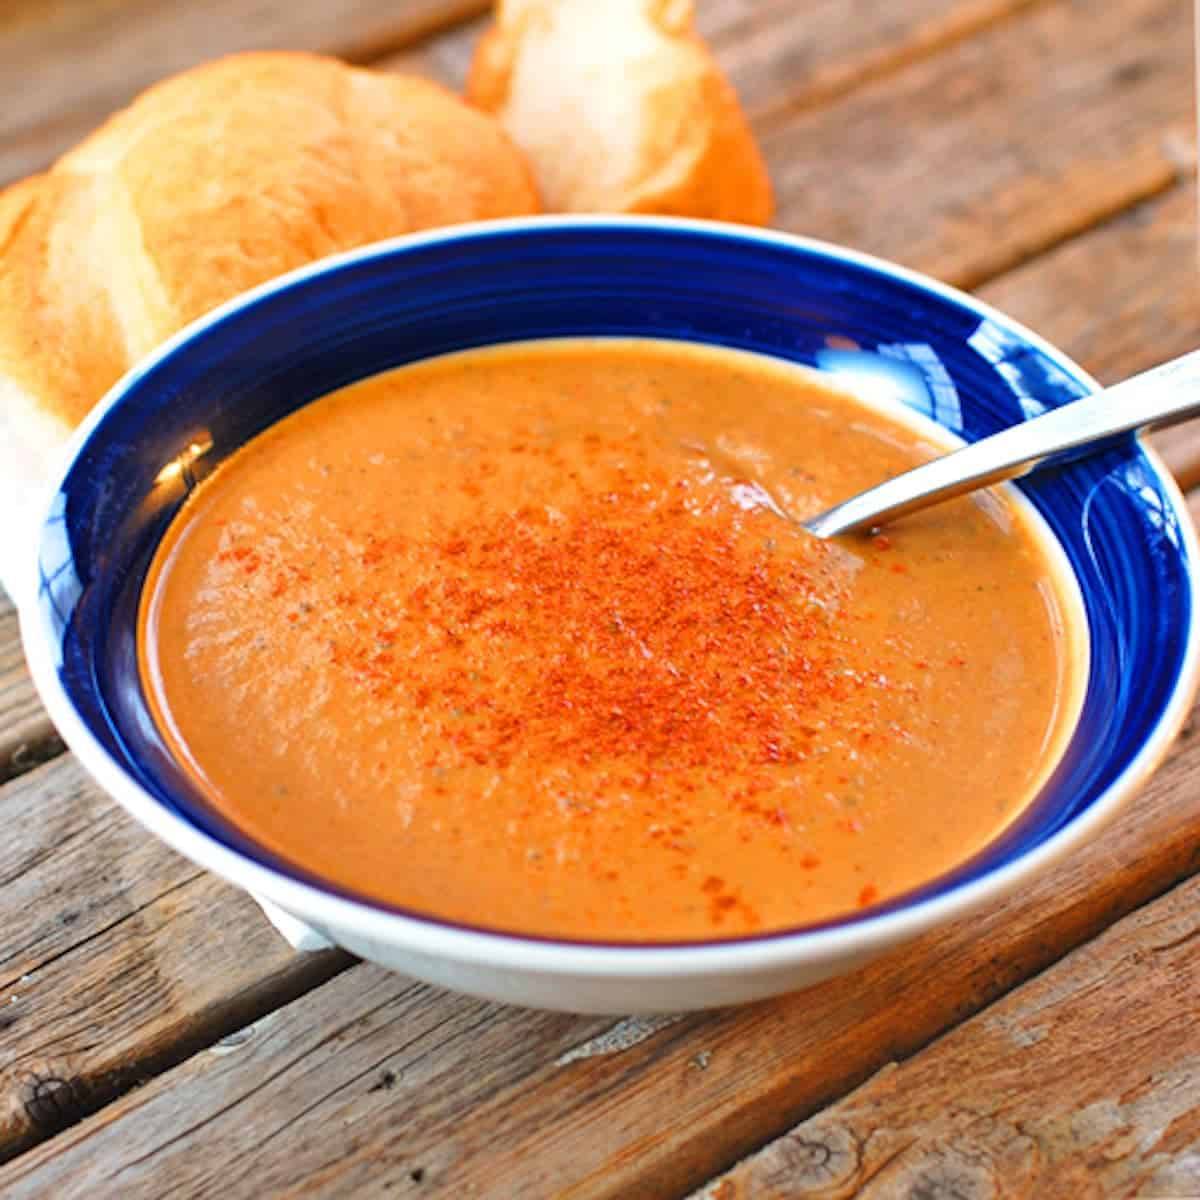 Pureed curry roasted red pepper and eggplant soup in a blue bowl.